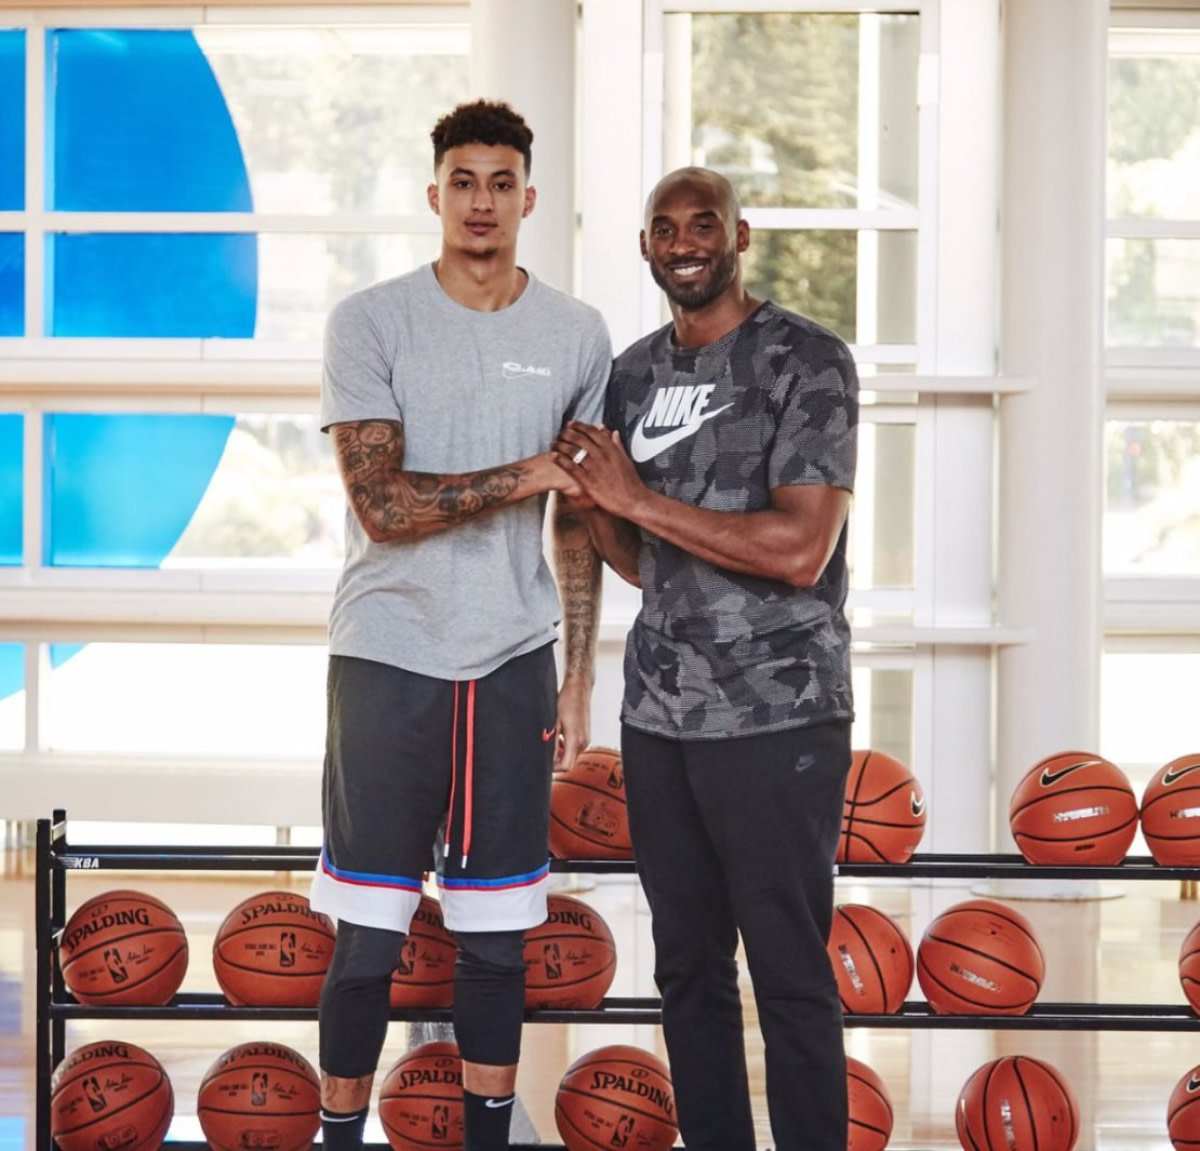 Kyle Kuzma Reveals The Most Valuable Piece Of Advice He Received From Kobe Bryant: “Life Happens…Storms Come And Go You Just Stay Calm.”